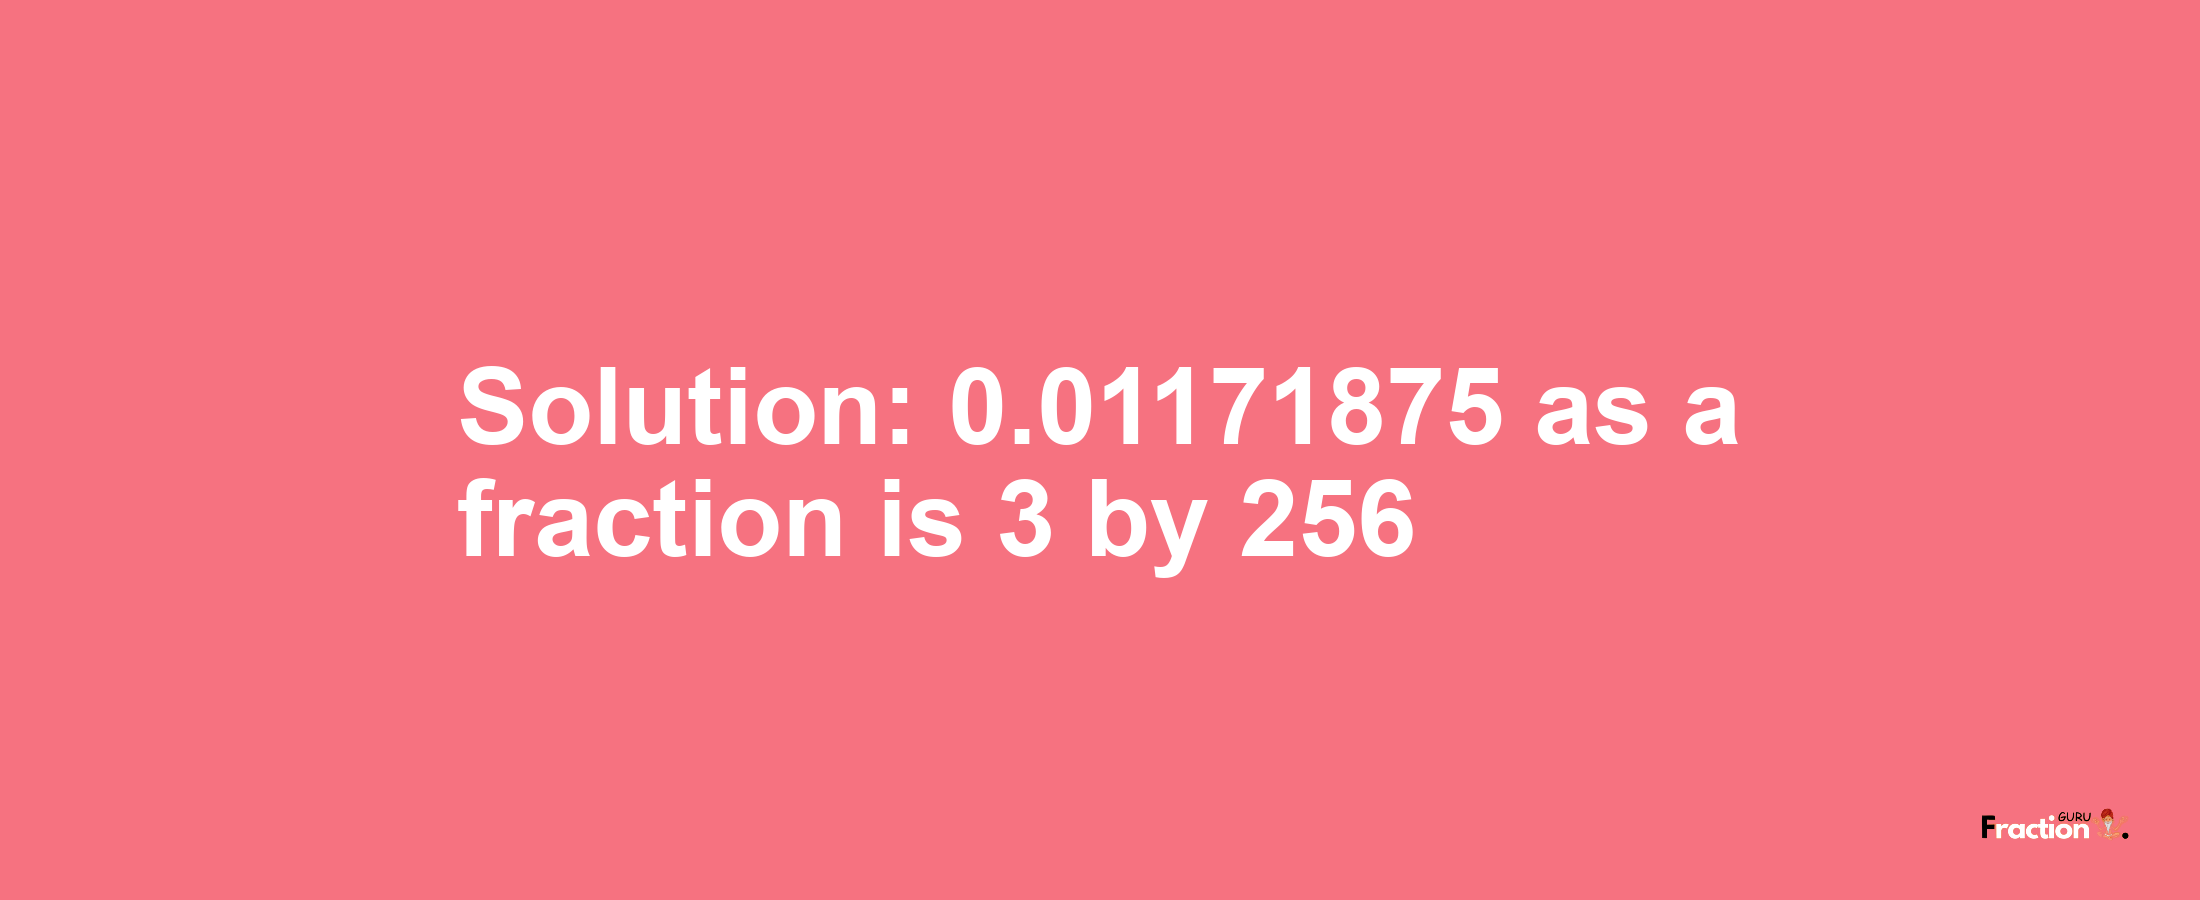 Solution:0.01171875 as a fraction is 3/256